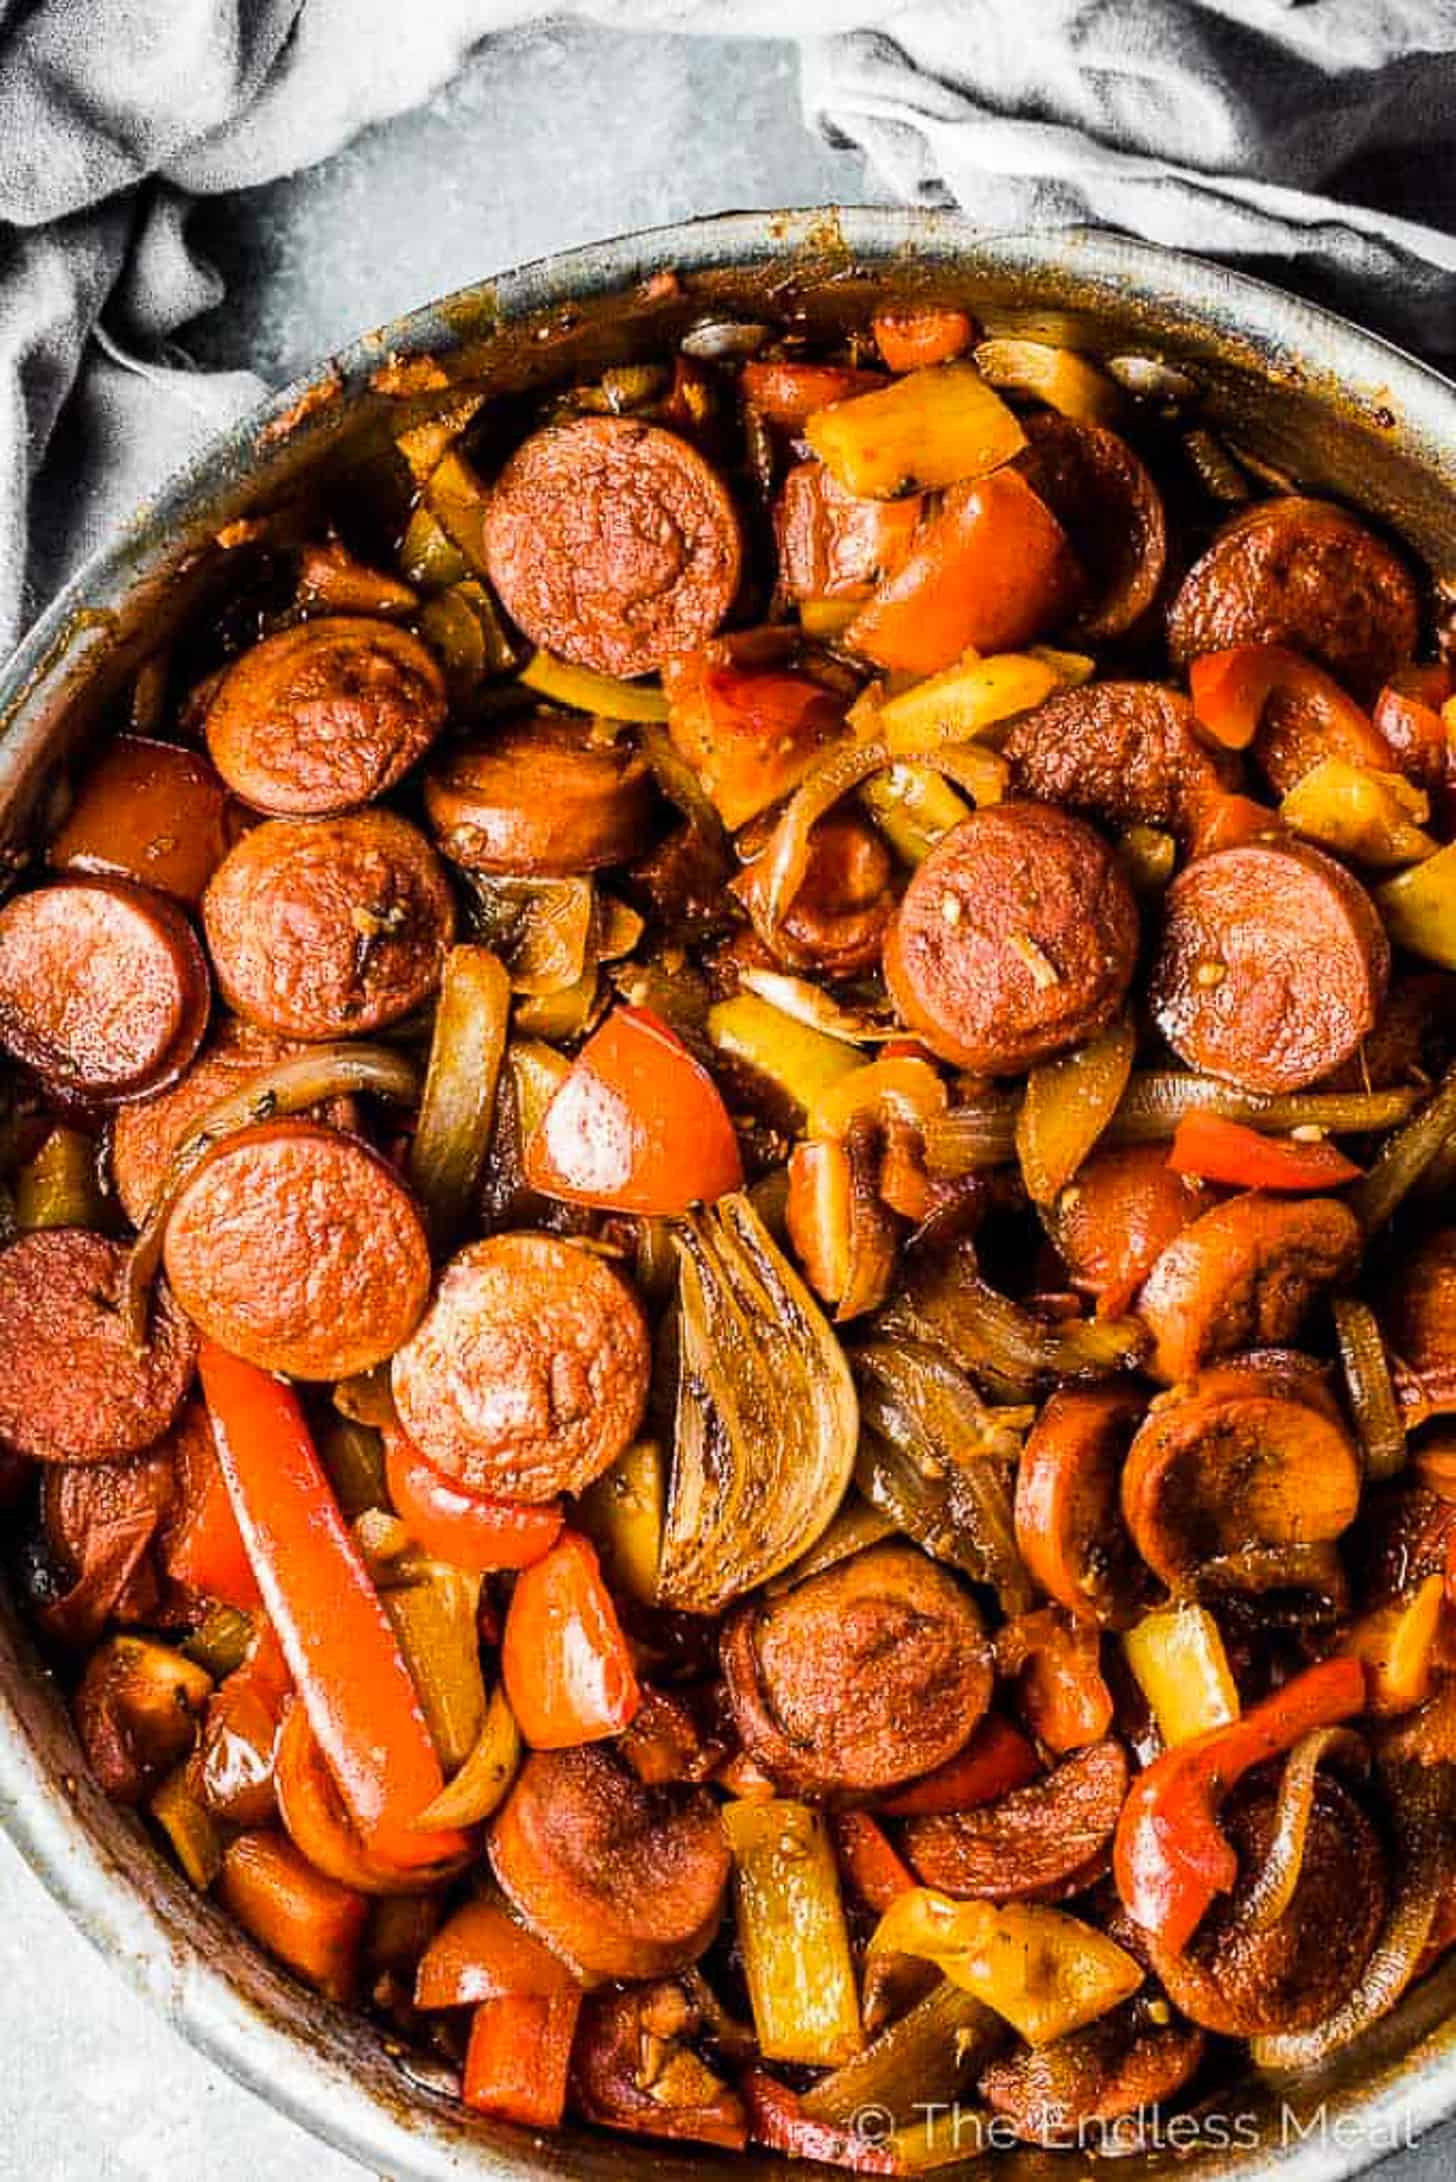 This recipe with garlic sausage and peppers in a pan